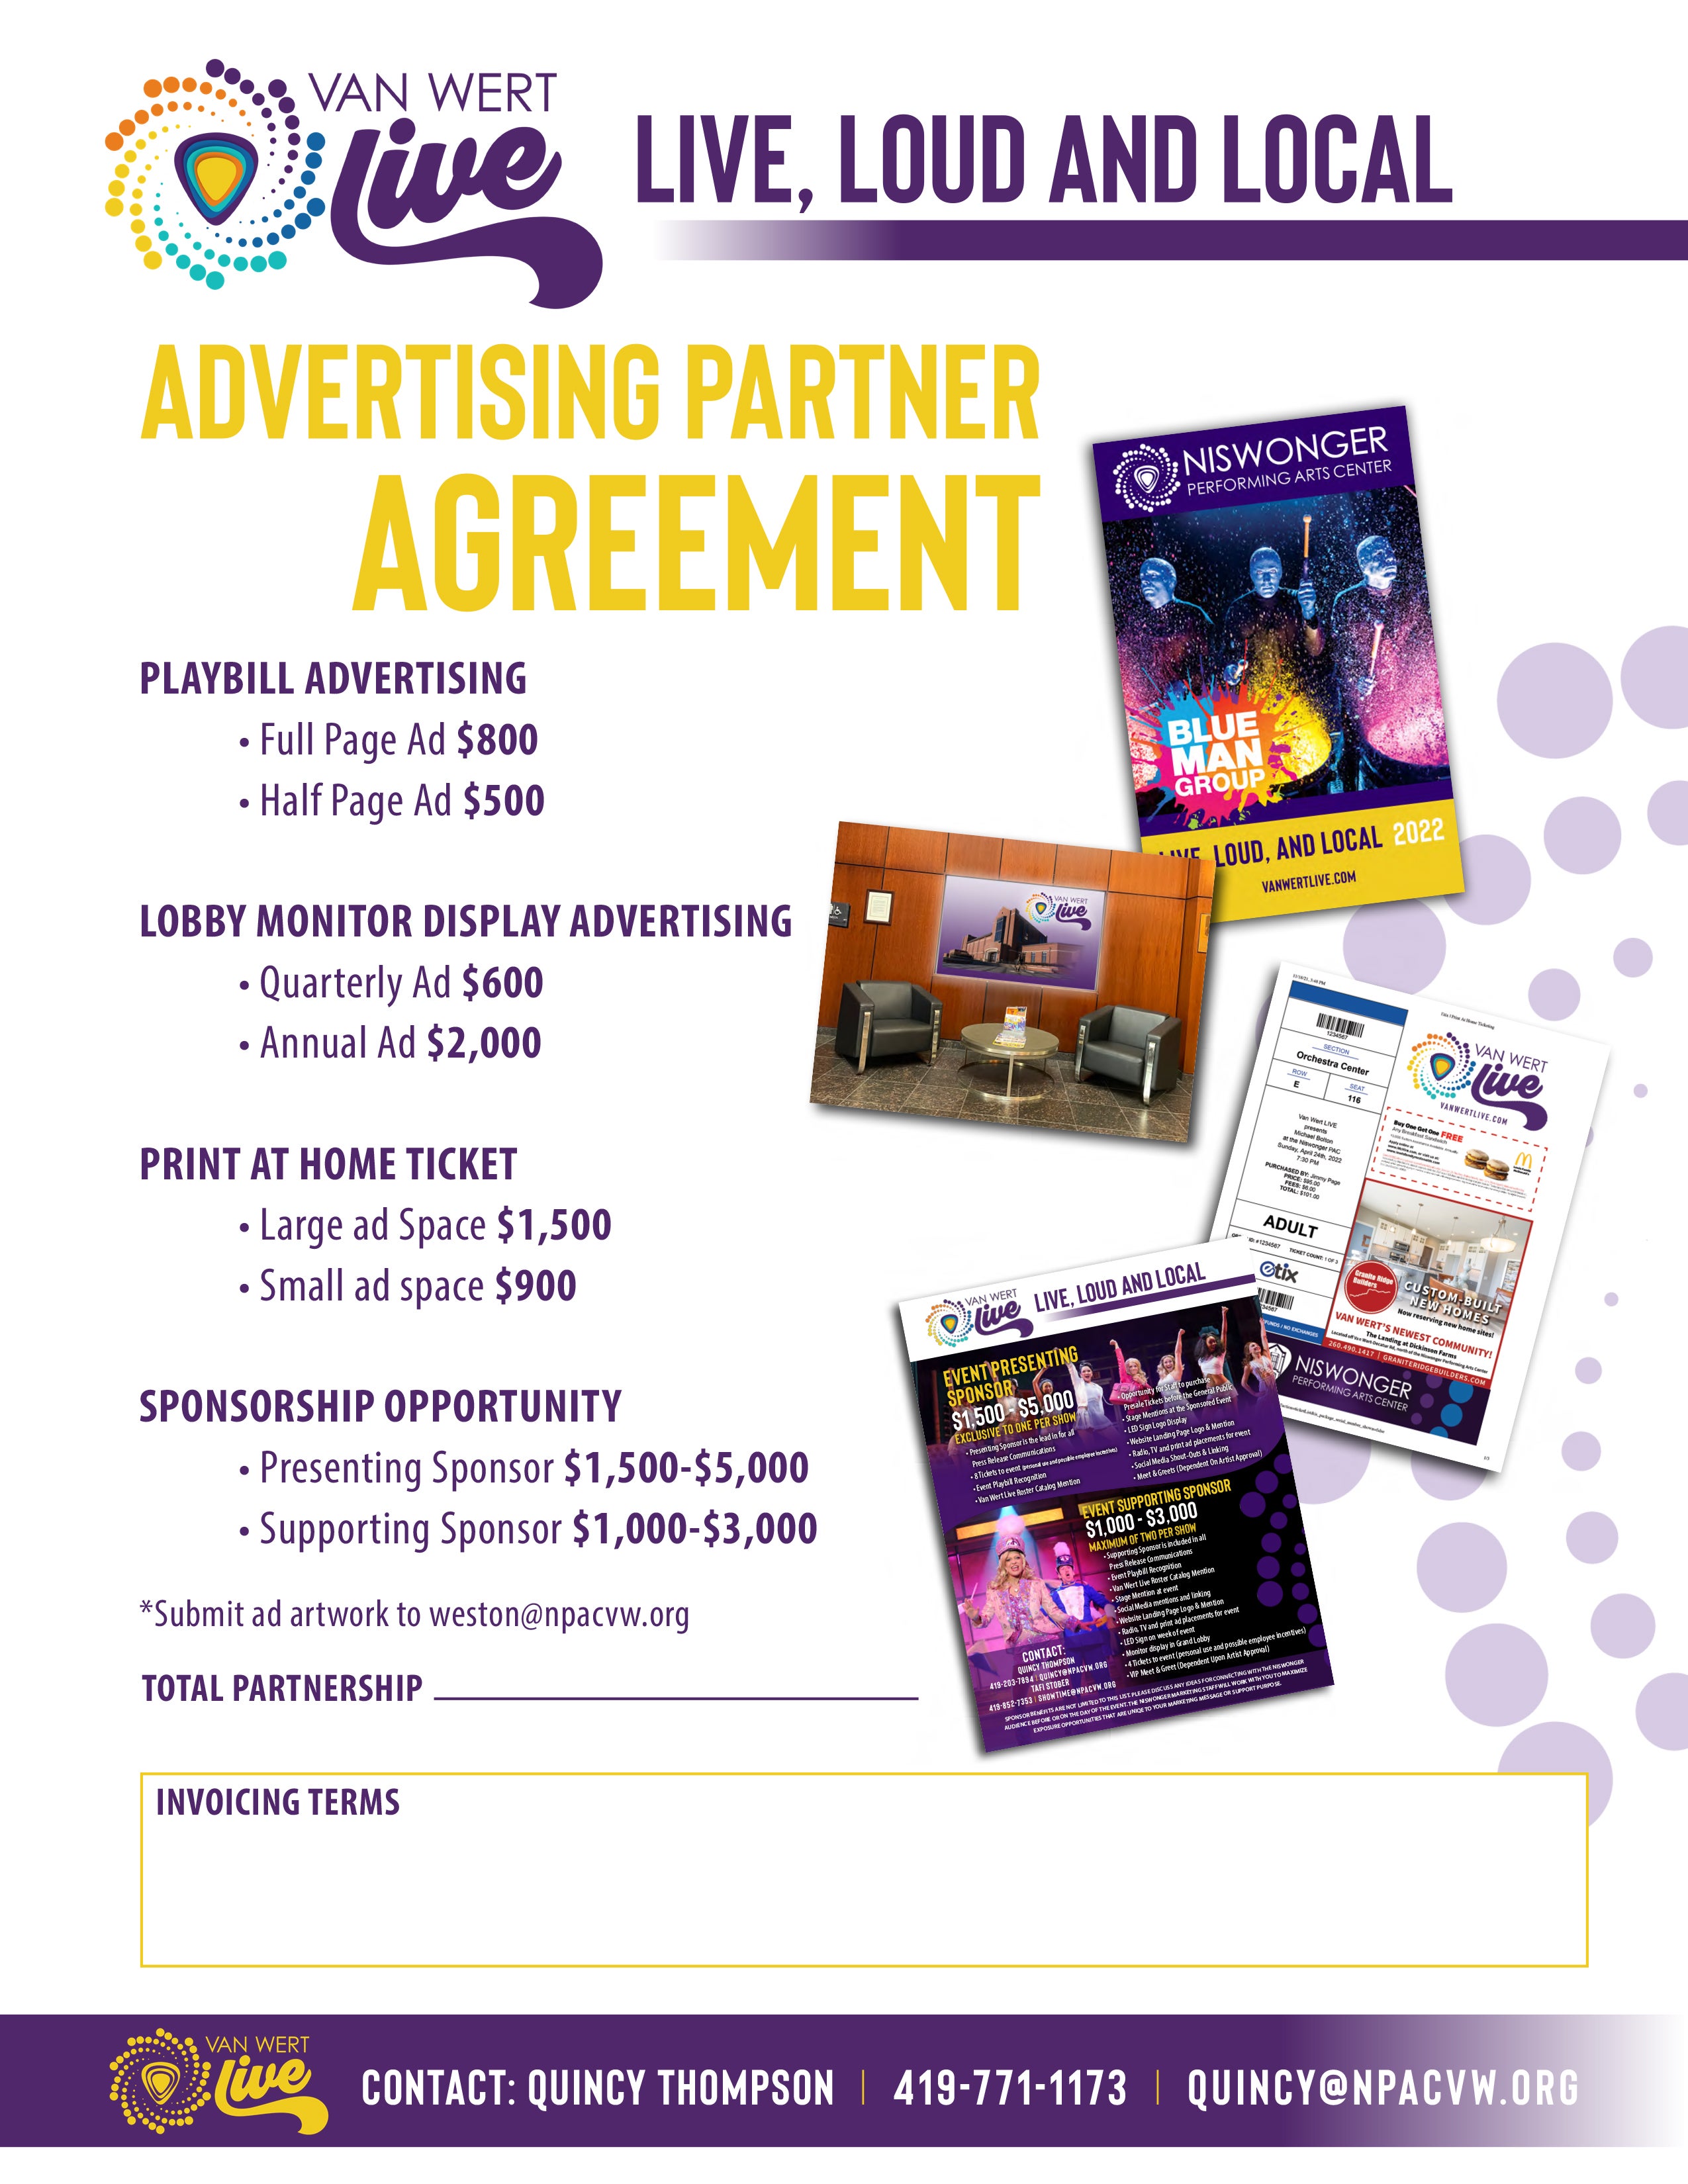 Ad Agreement Page Flyer.jpg